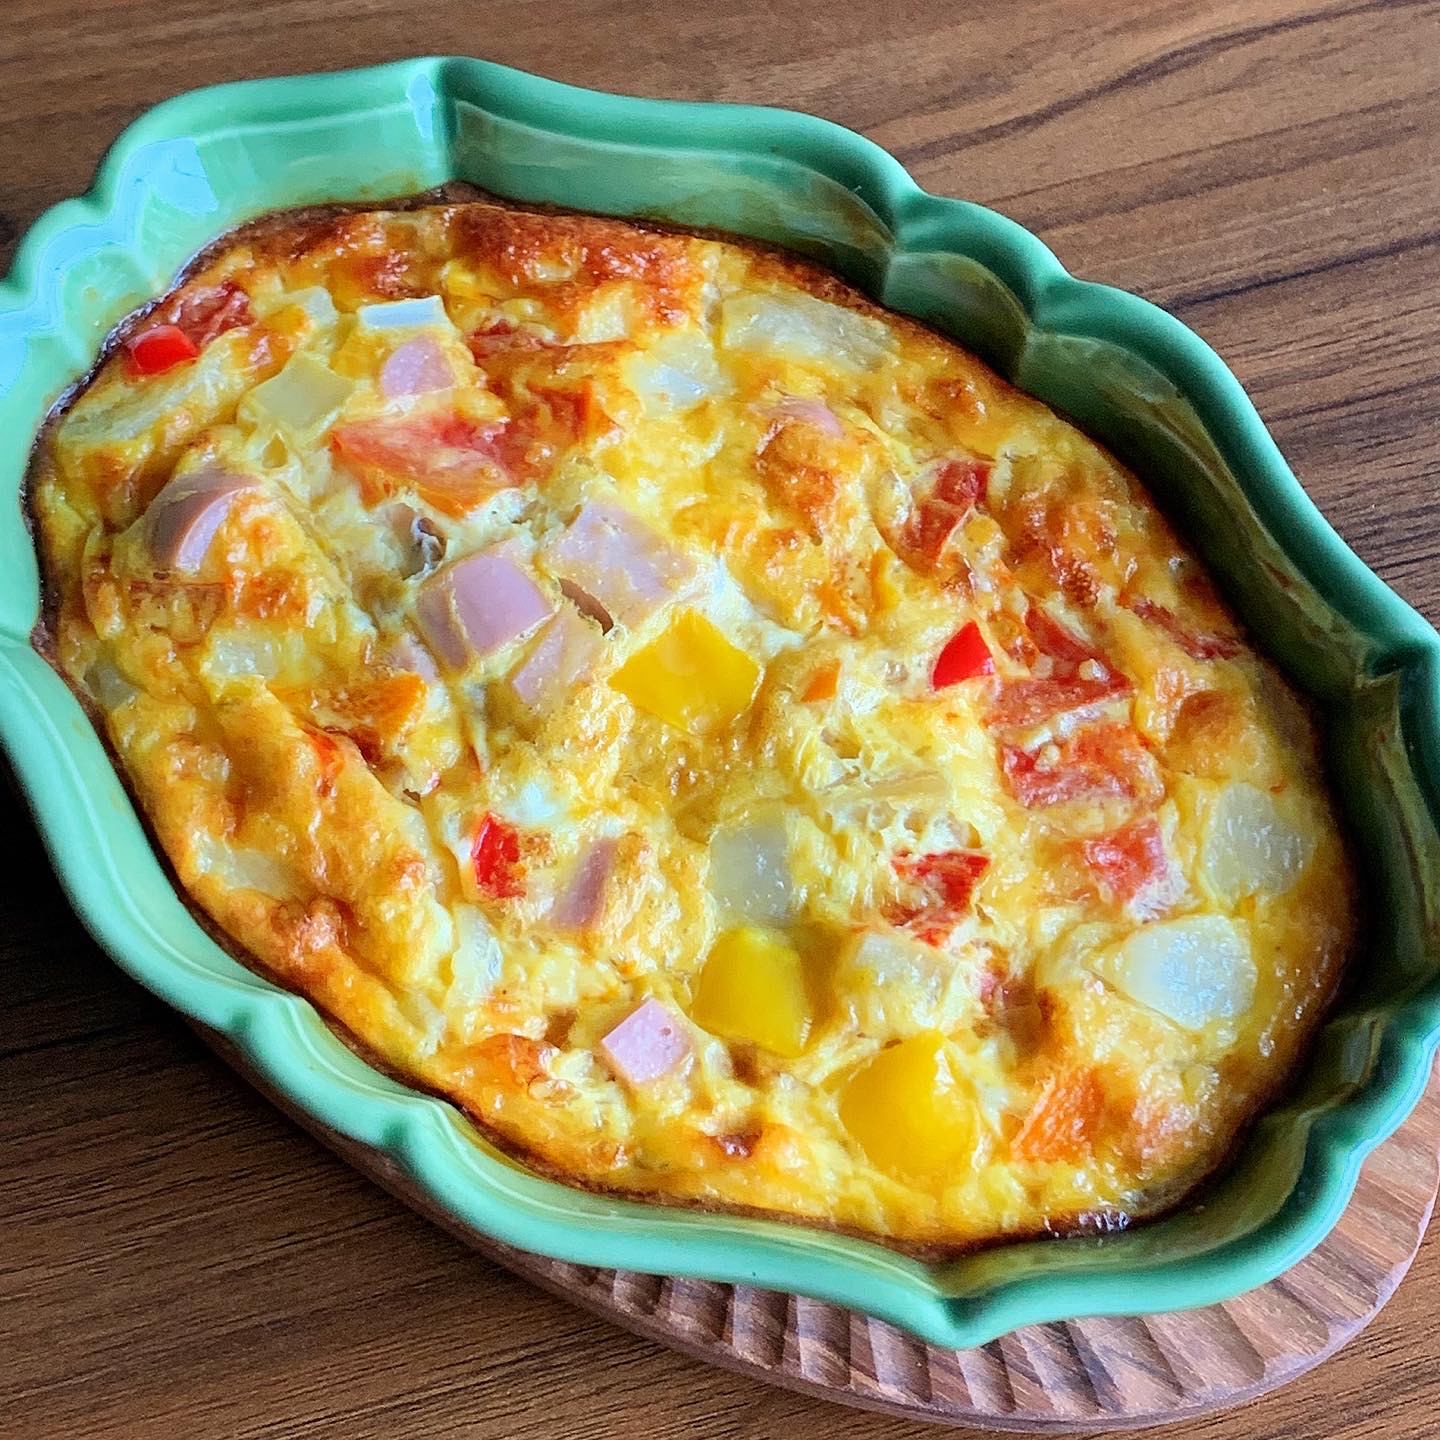 An omelet with ingredients such as paprika, potatoes, and fish sausage.